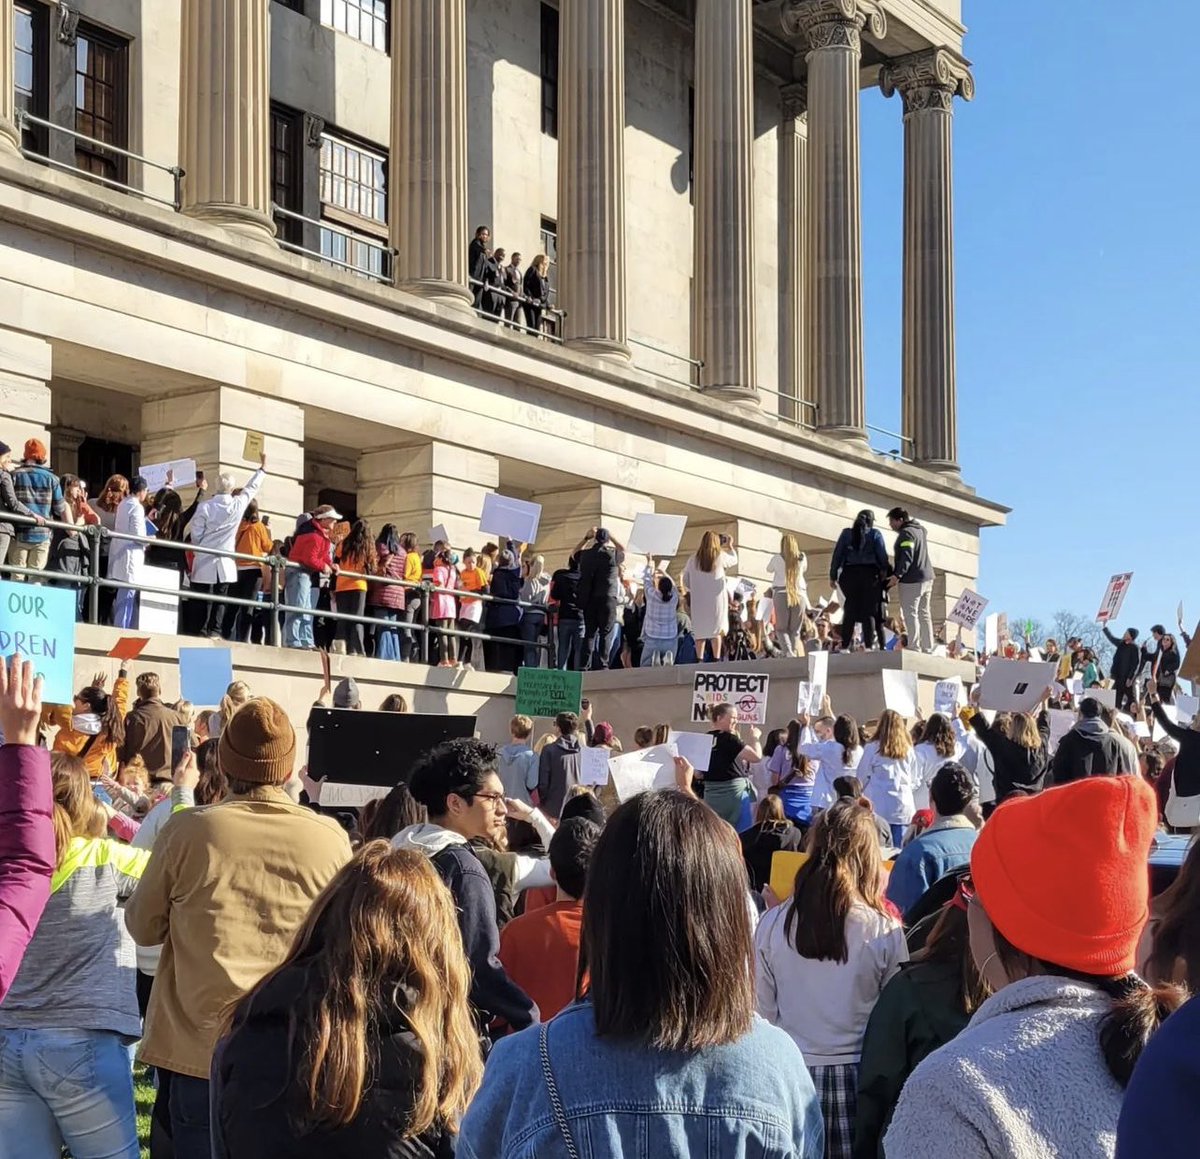 ‘Where is FBI and National Guard?’ Social media users ask after an alleged left wing insurrection at Tennessee state capitol